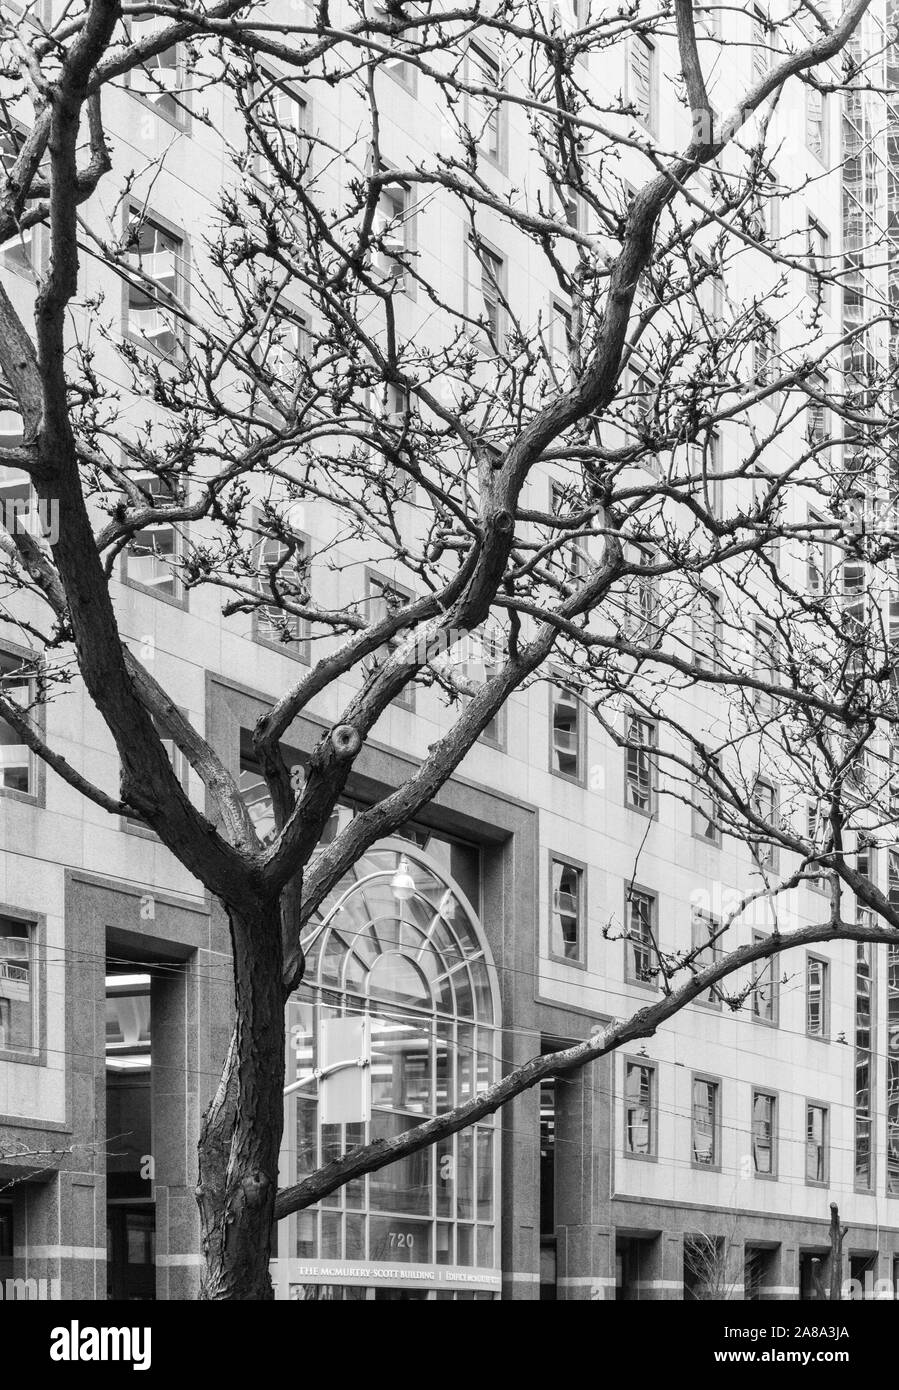 Stark trees, bare of leaves, become random graphic design elements in front of angular buildings, doorways and windows in a city downtown urban core Stock Photo